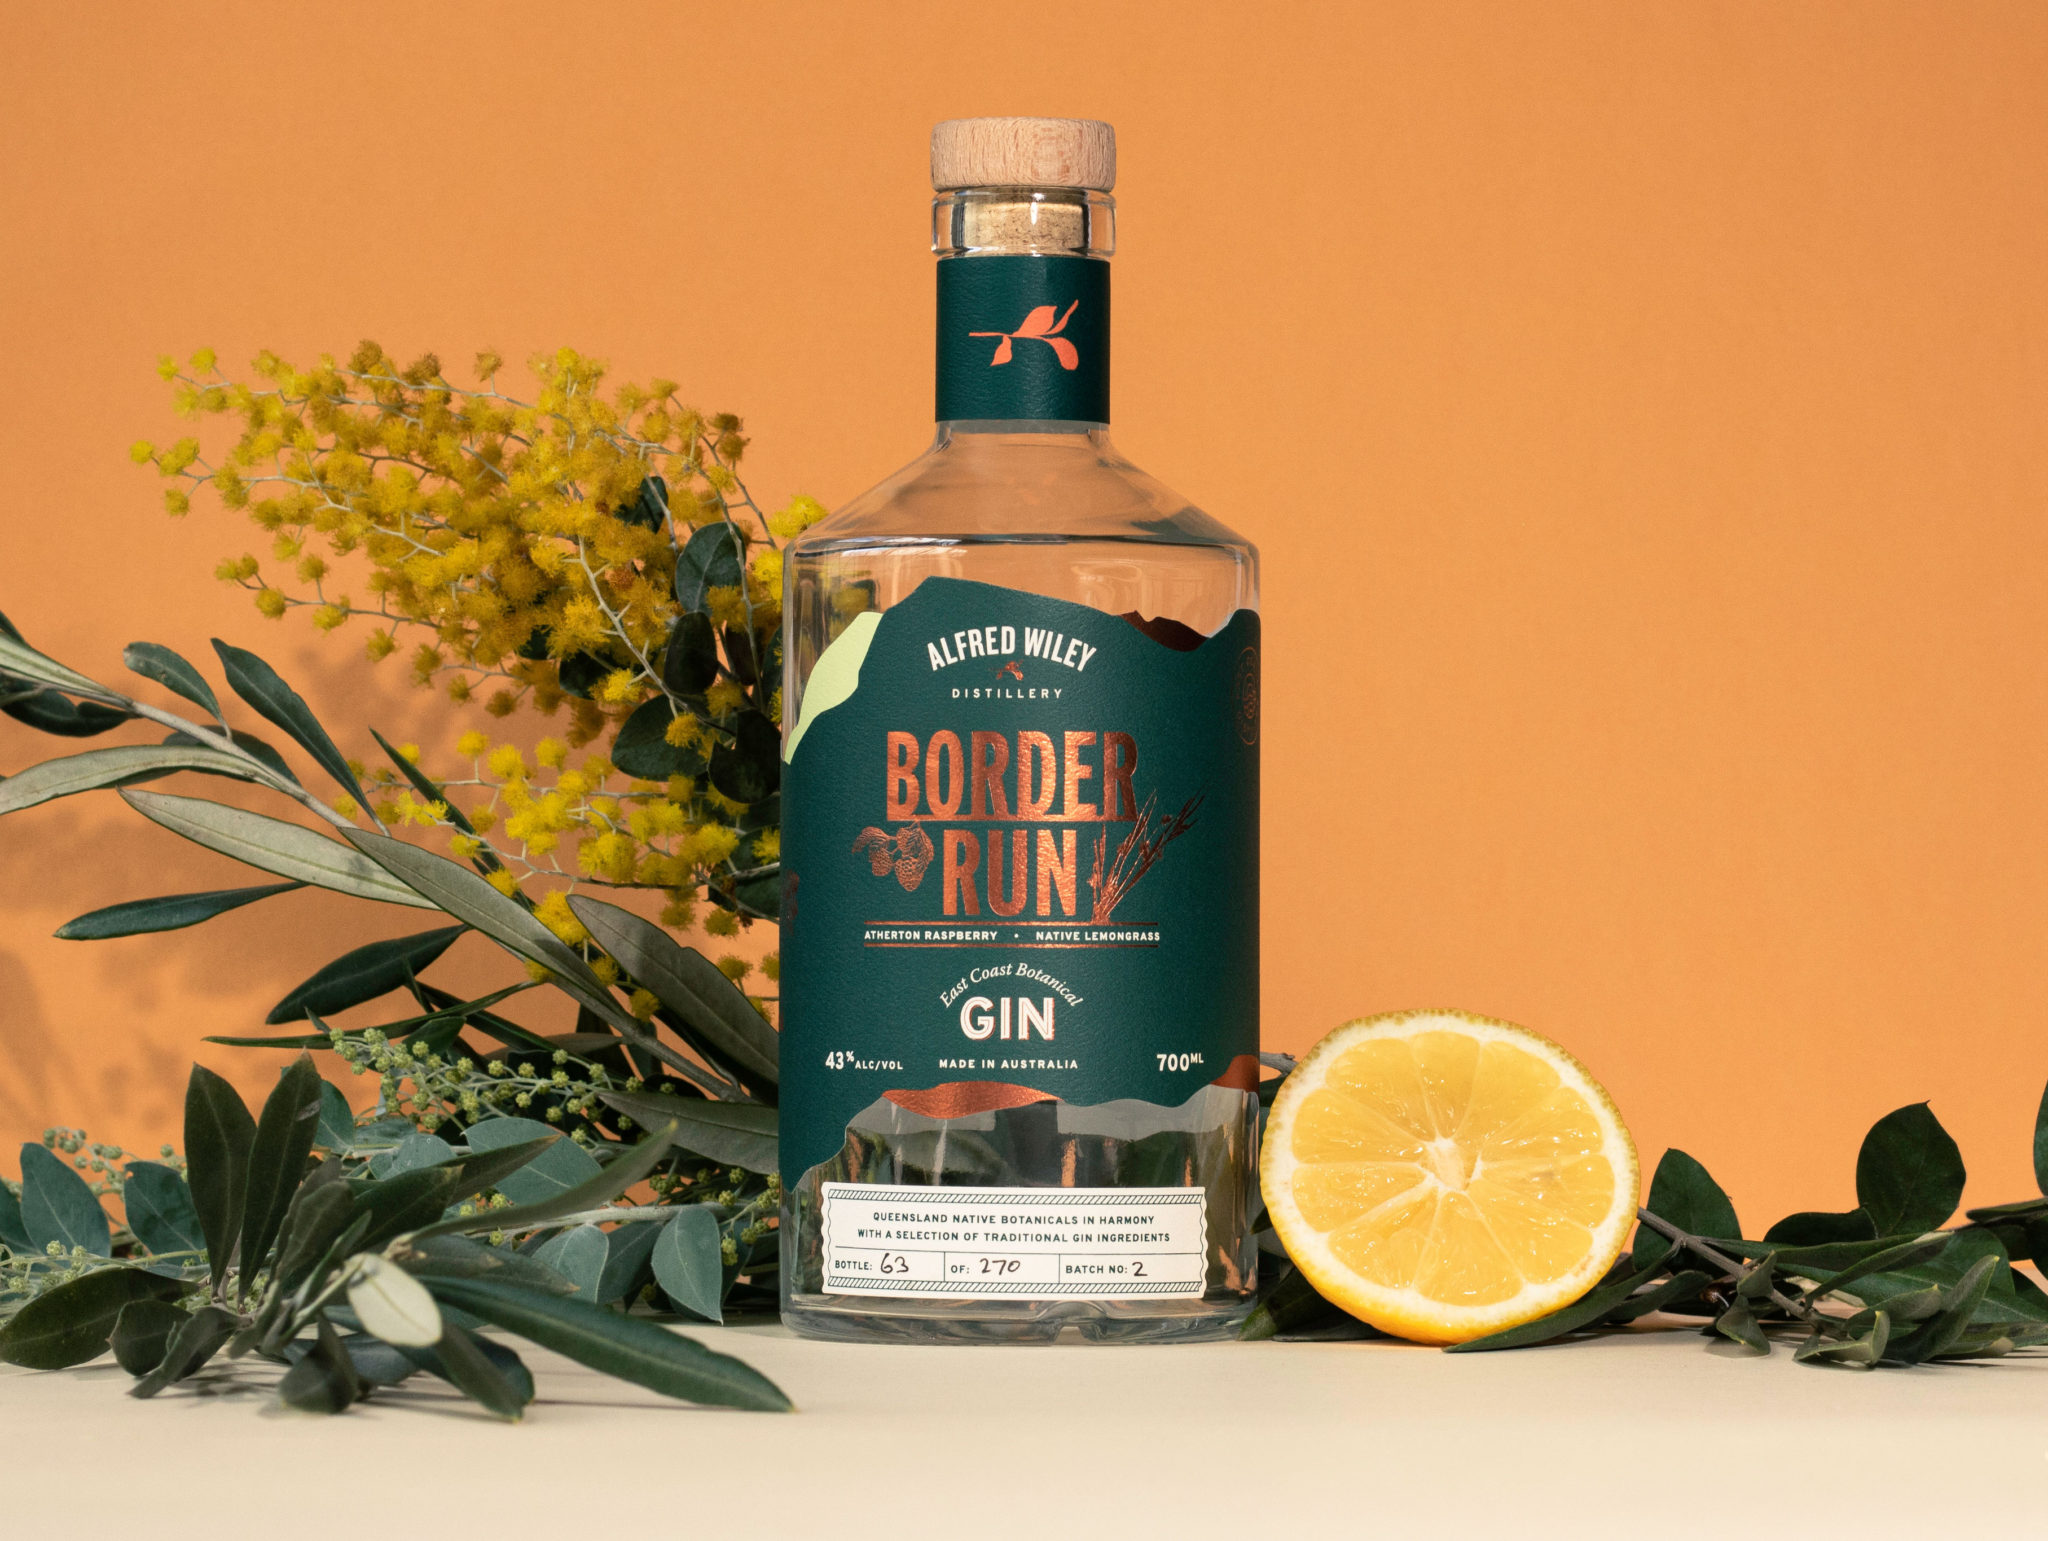 Gin Packaging Design and Branding